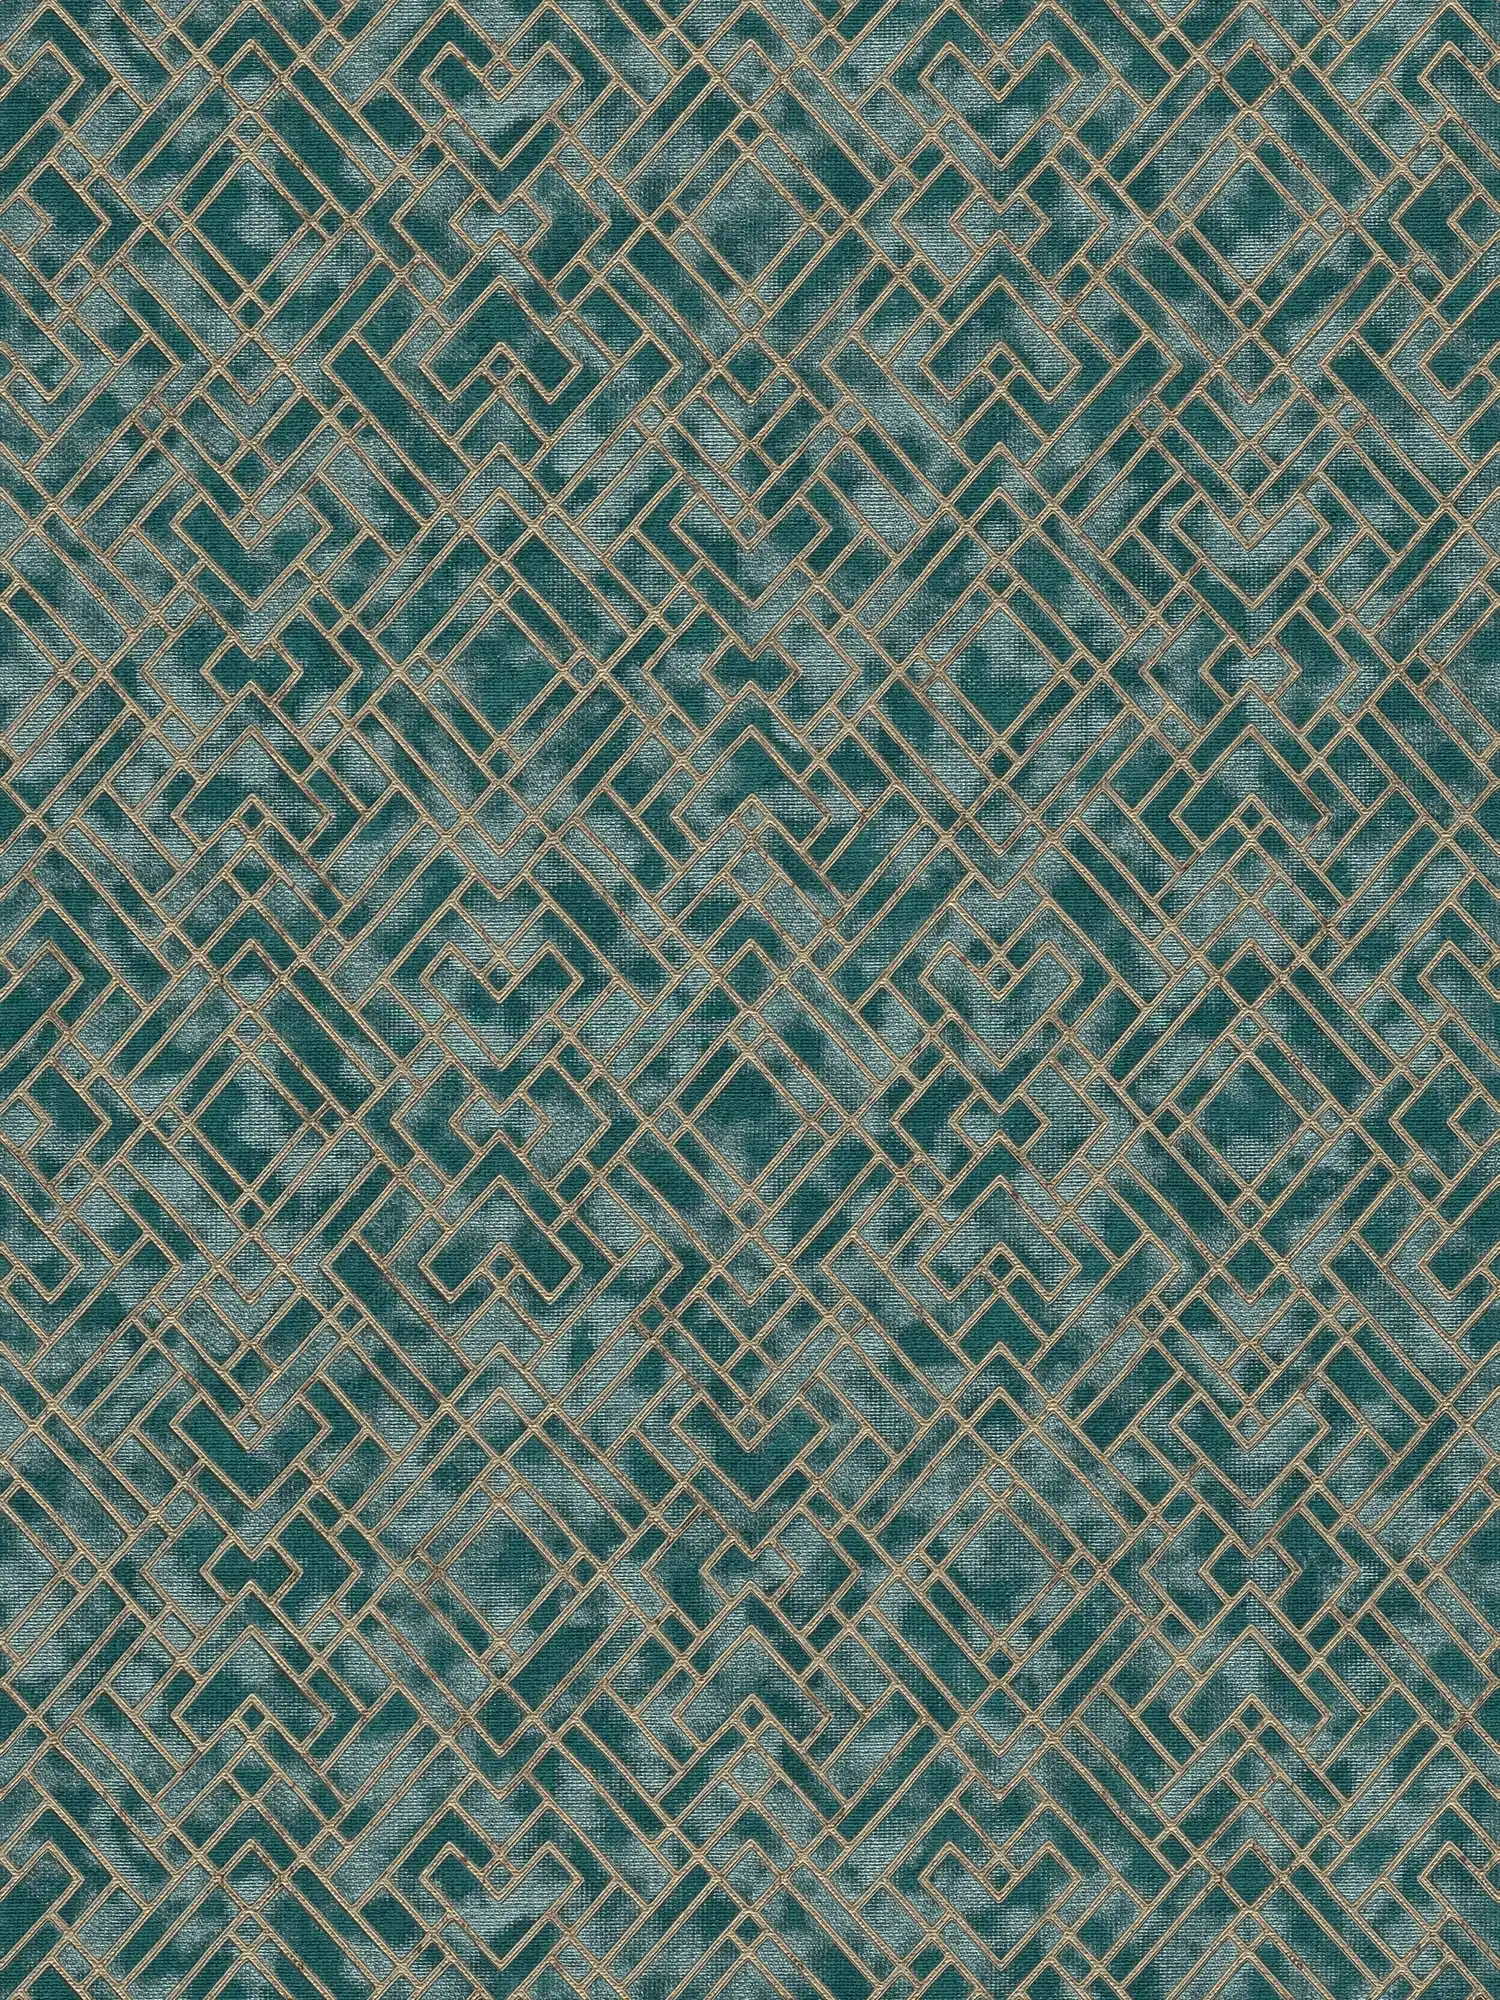         Art deco wallpaper with silver graphic pattern - green
    